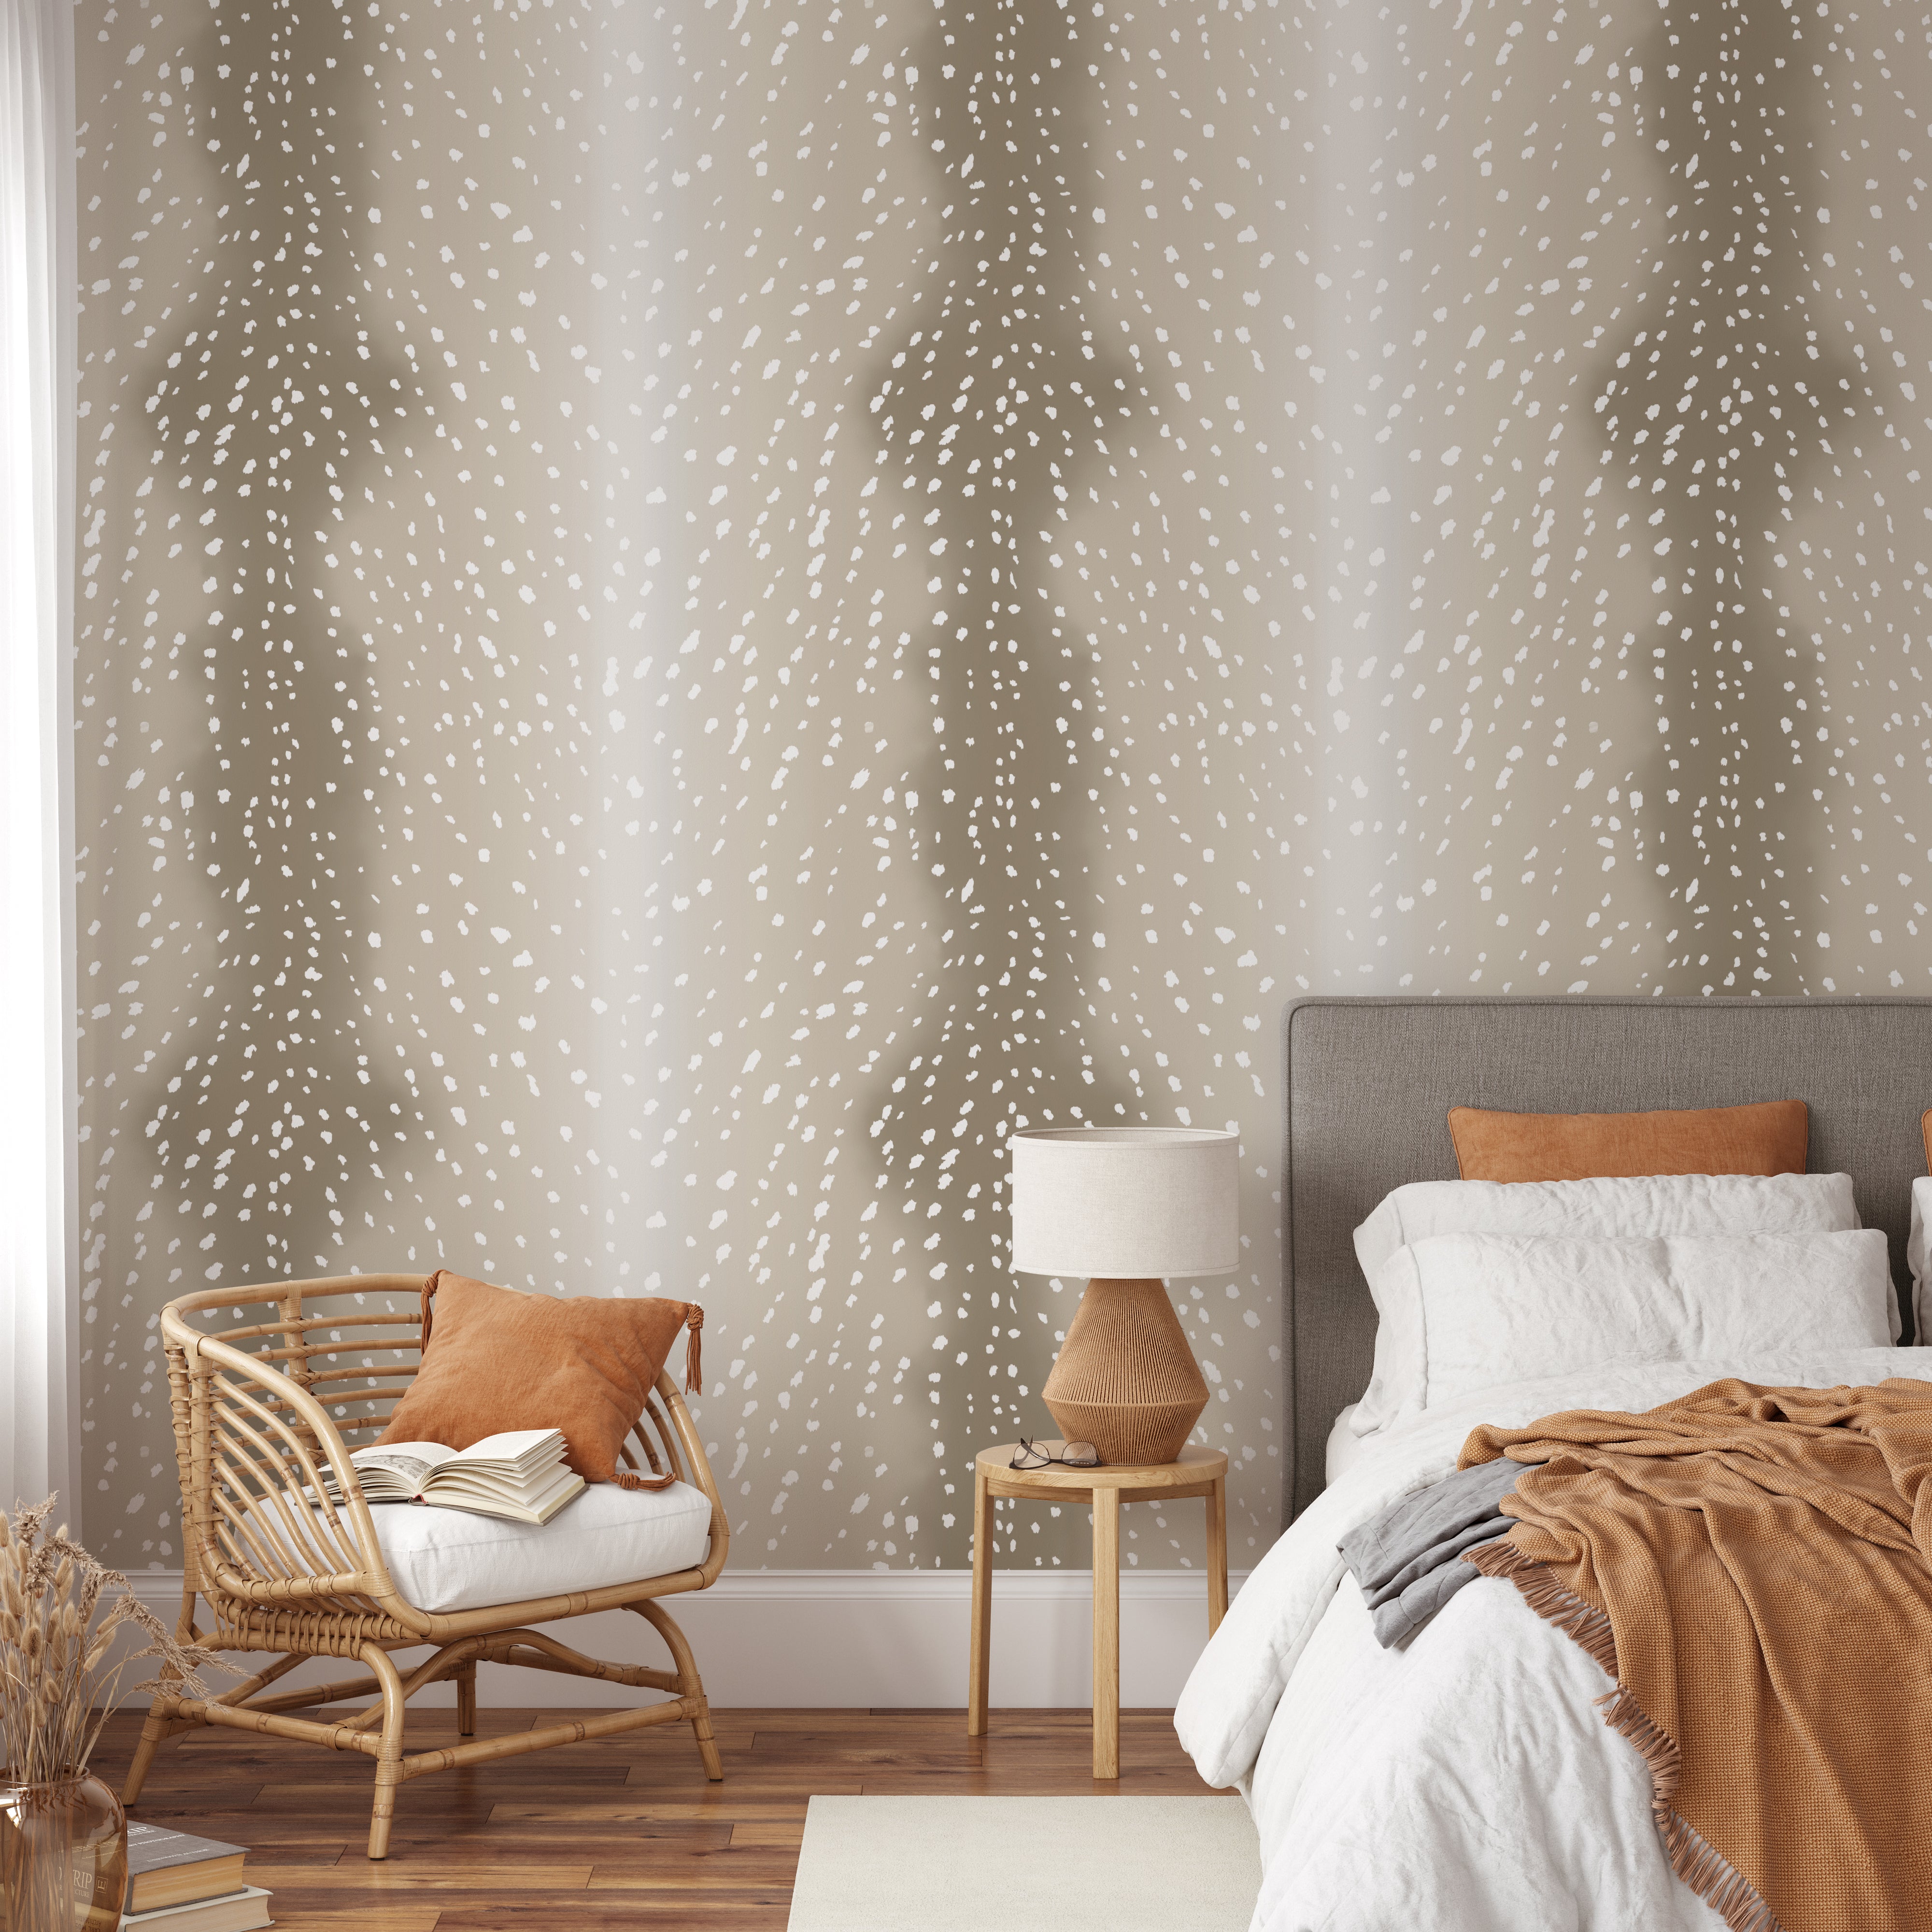 Girls Just Wanna Have FAWN Wallpaper - The Chelsea DeBoer Line from WALL BLUSH